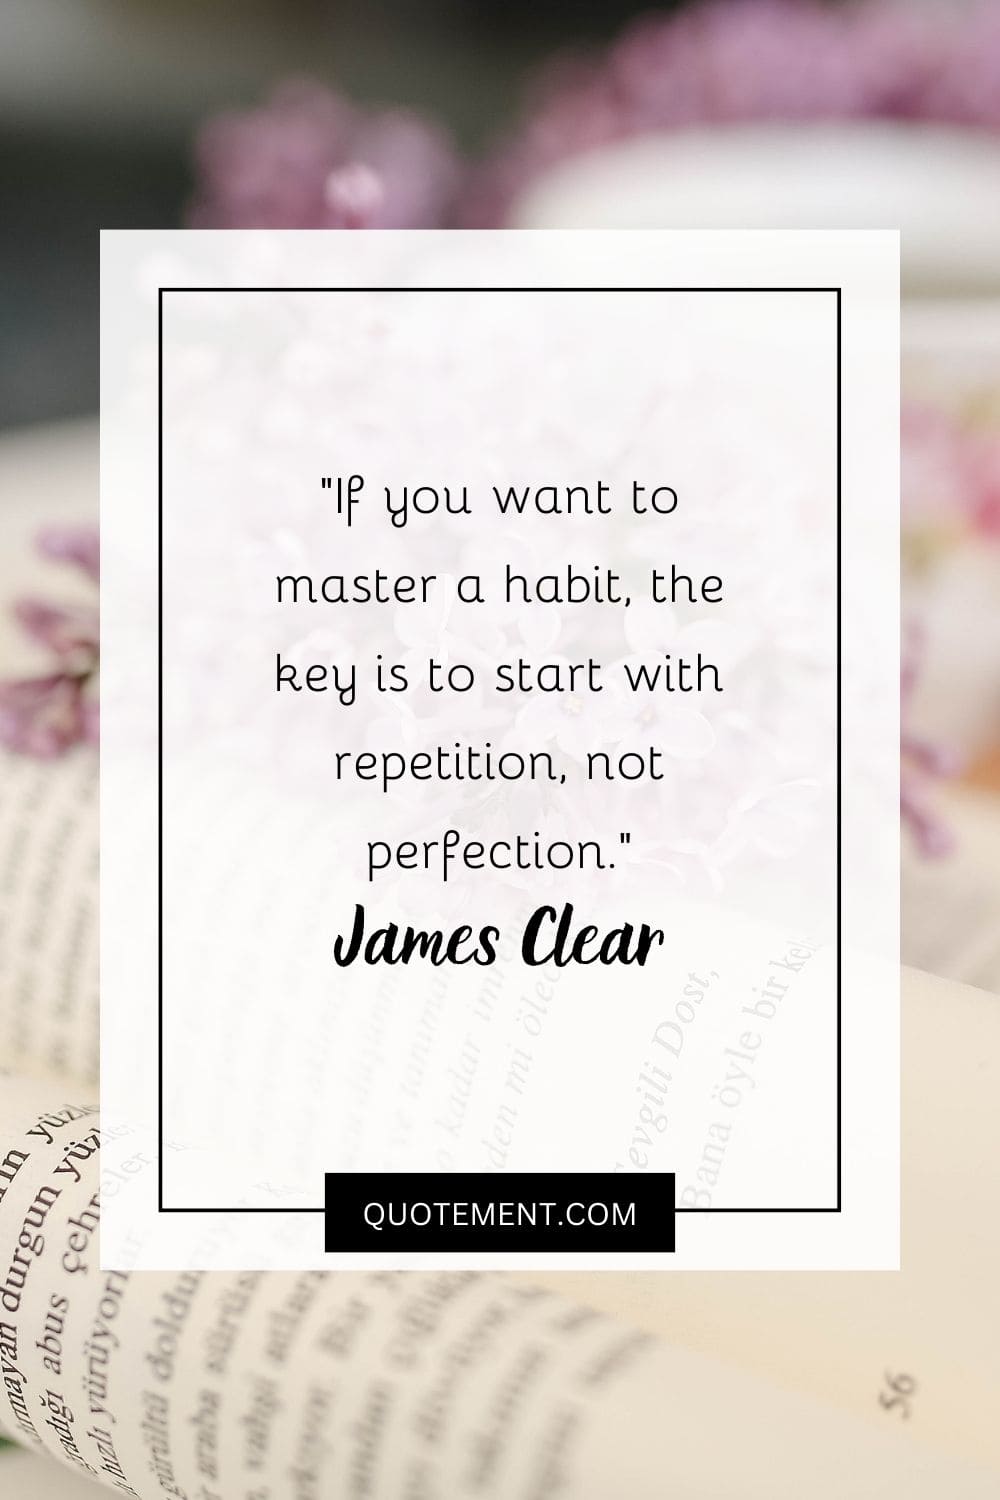 If you want to master a habit, the key is to start with repetition, not perfection.